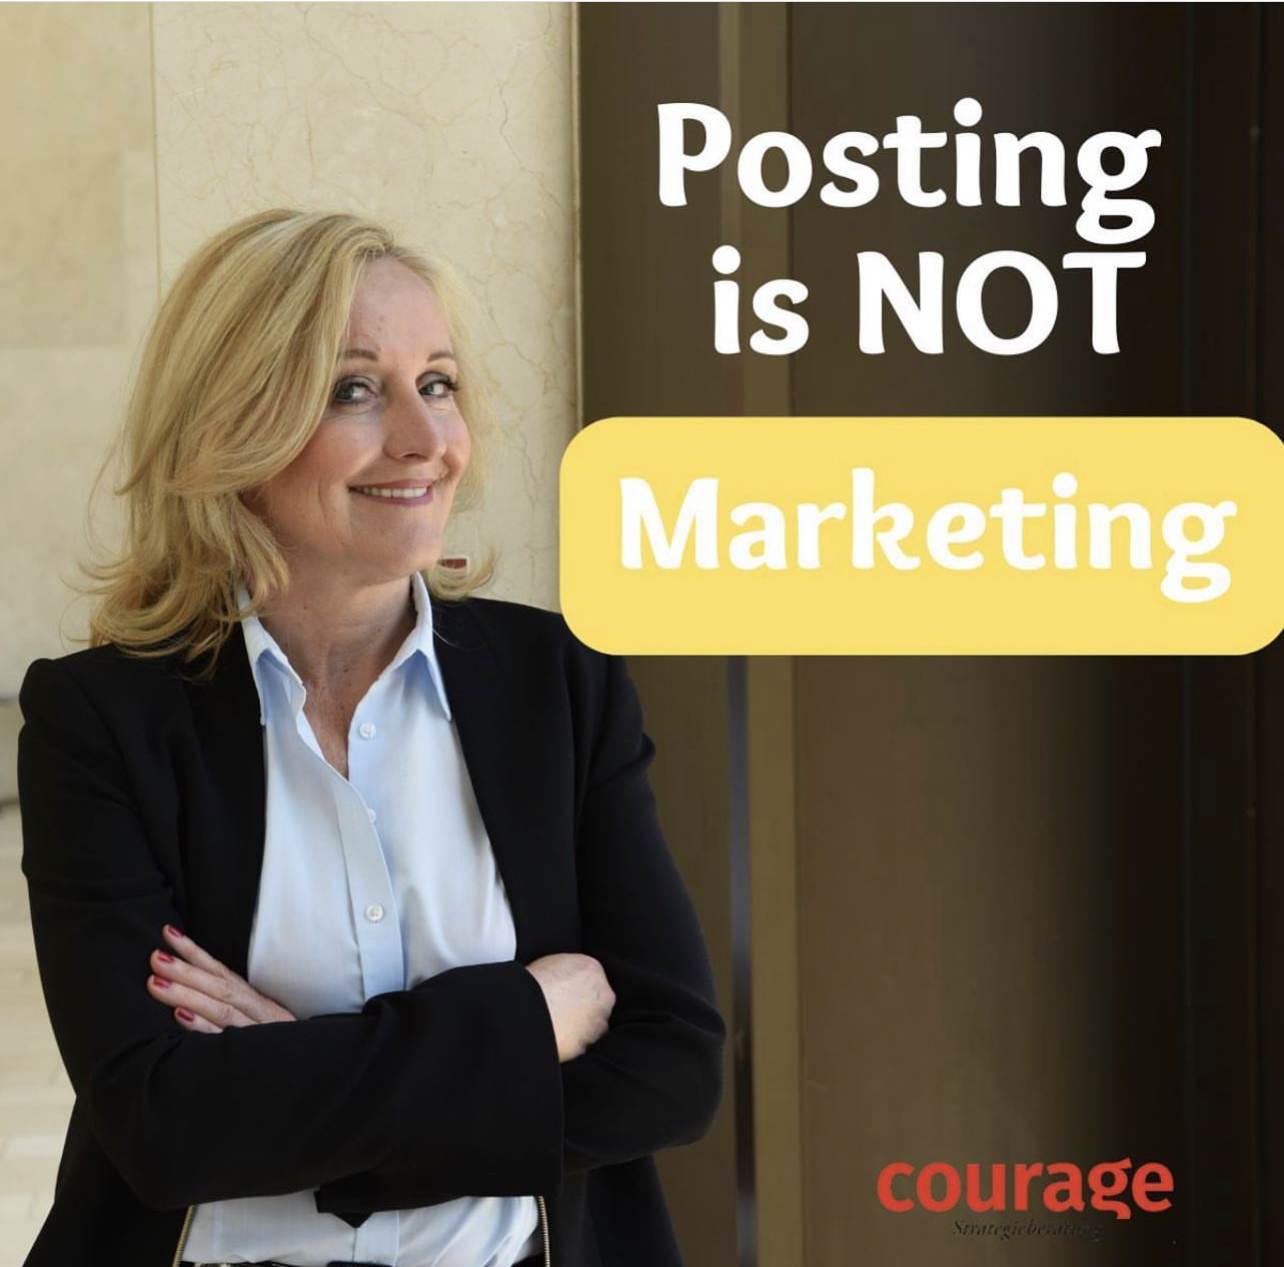 Posting is NOT Marketing